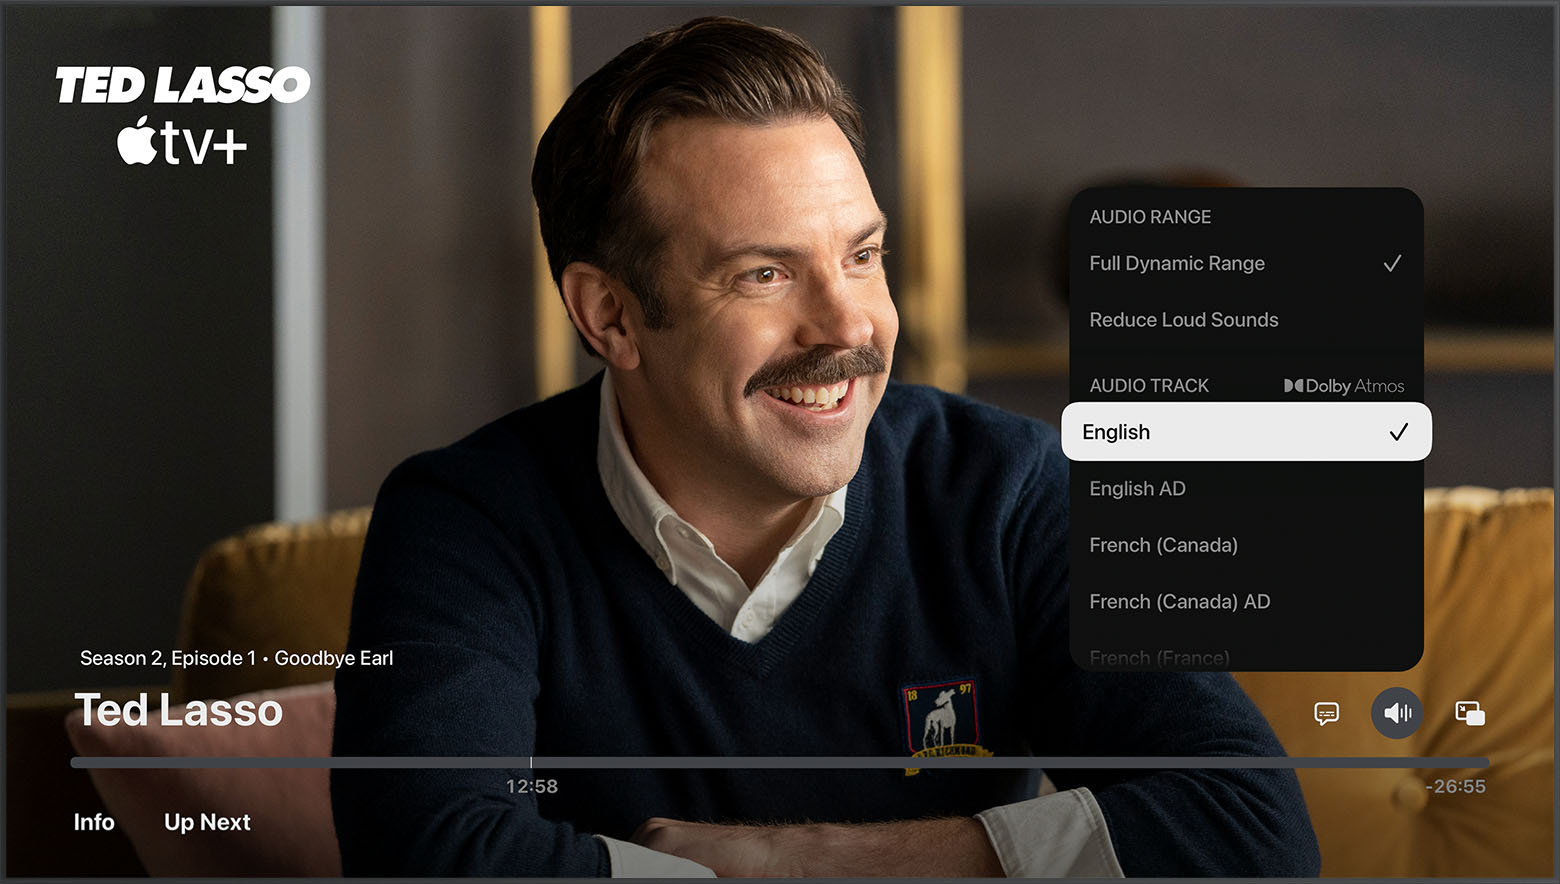 Audio Language options in the Apple TV app on Apple TV, smart TV and streaming device